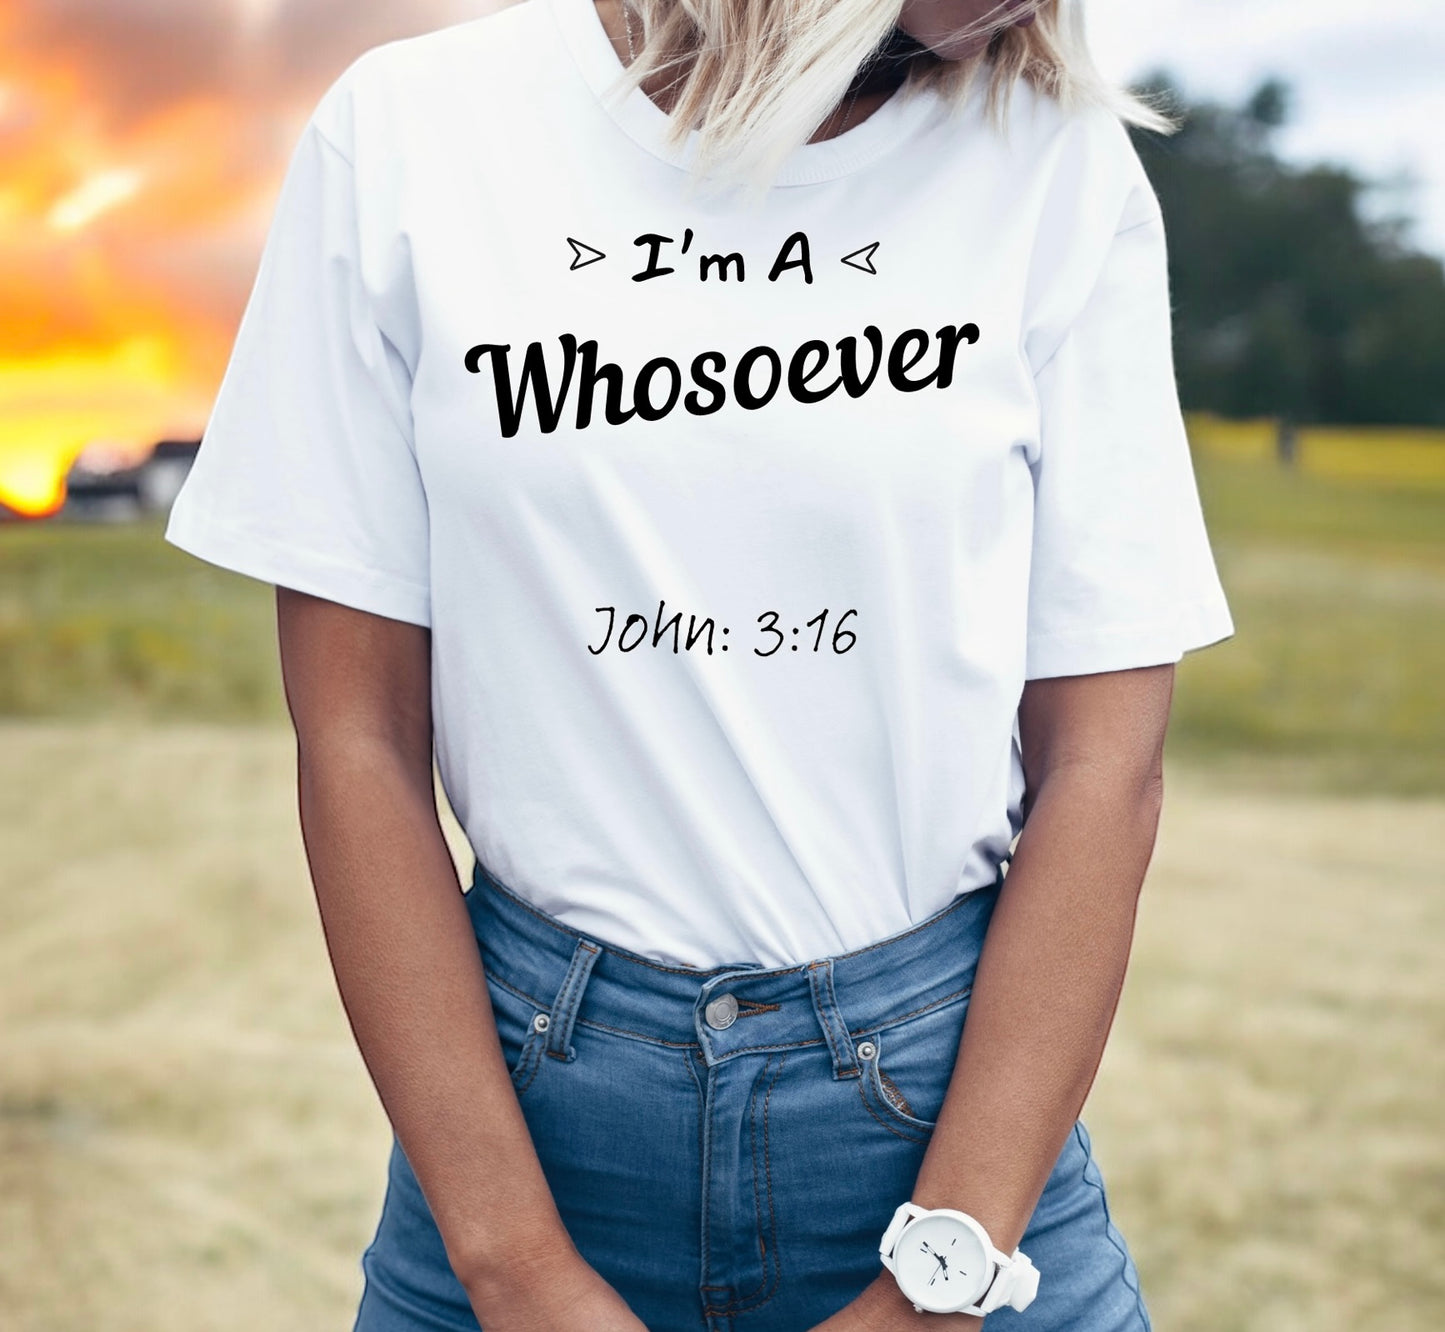 "John 3:16 'I'm a Whosoever' believer T-shirt in black and white."